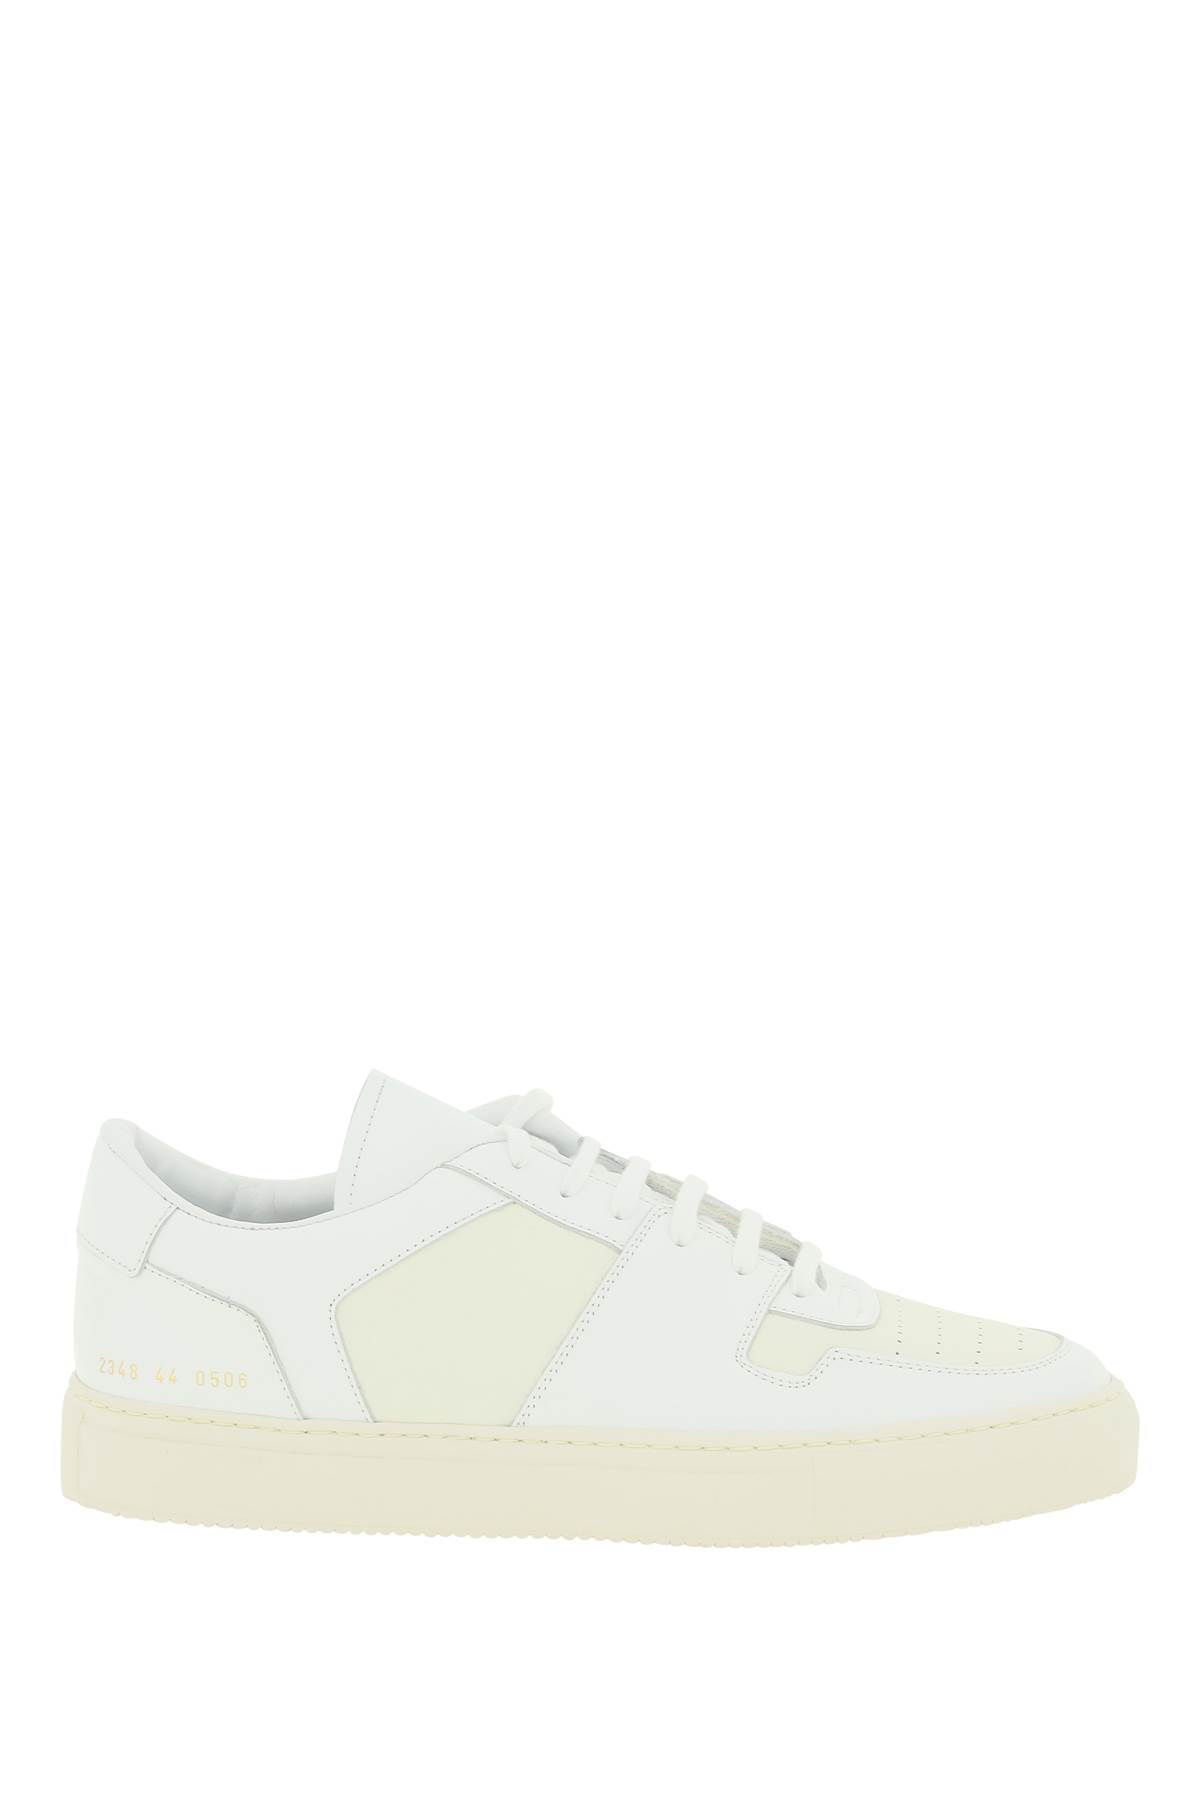 Common Projects Leather Decades Low Sneakers